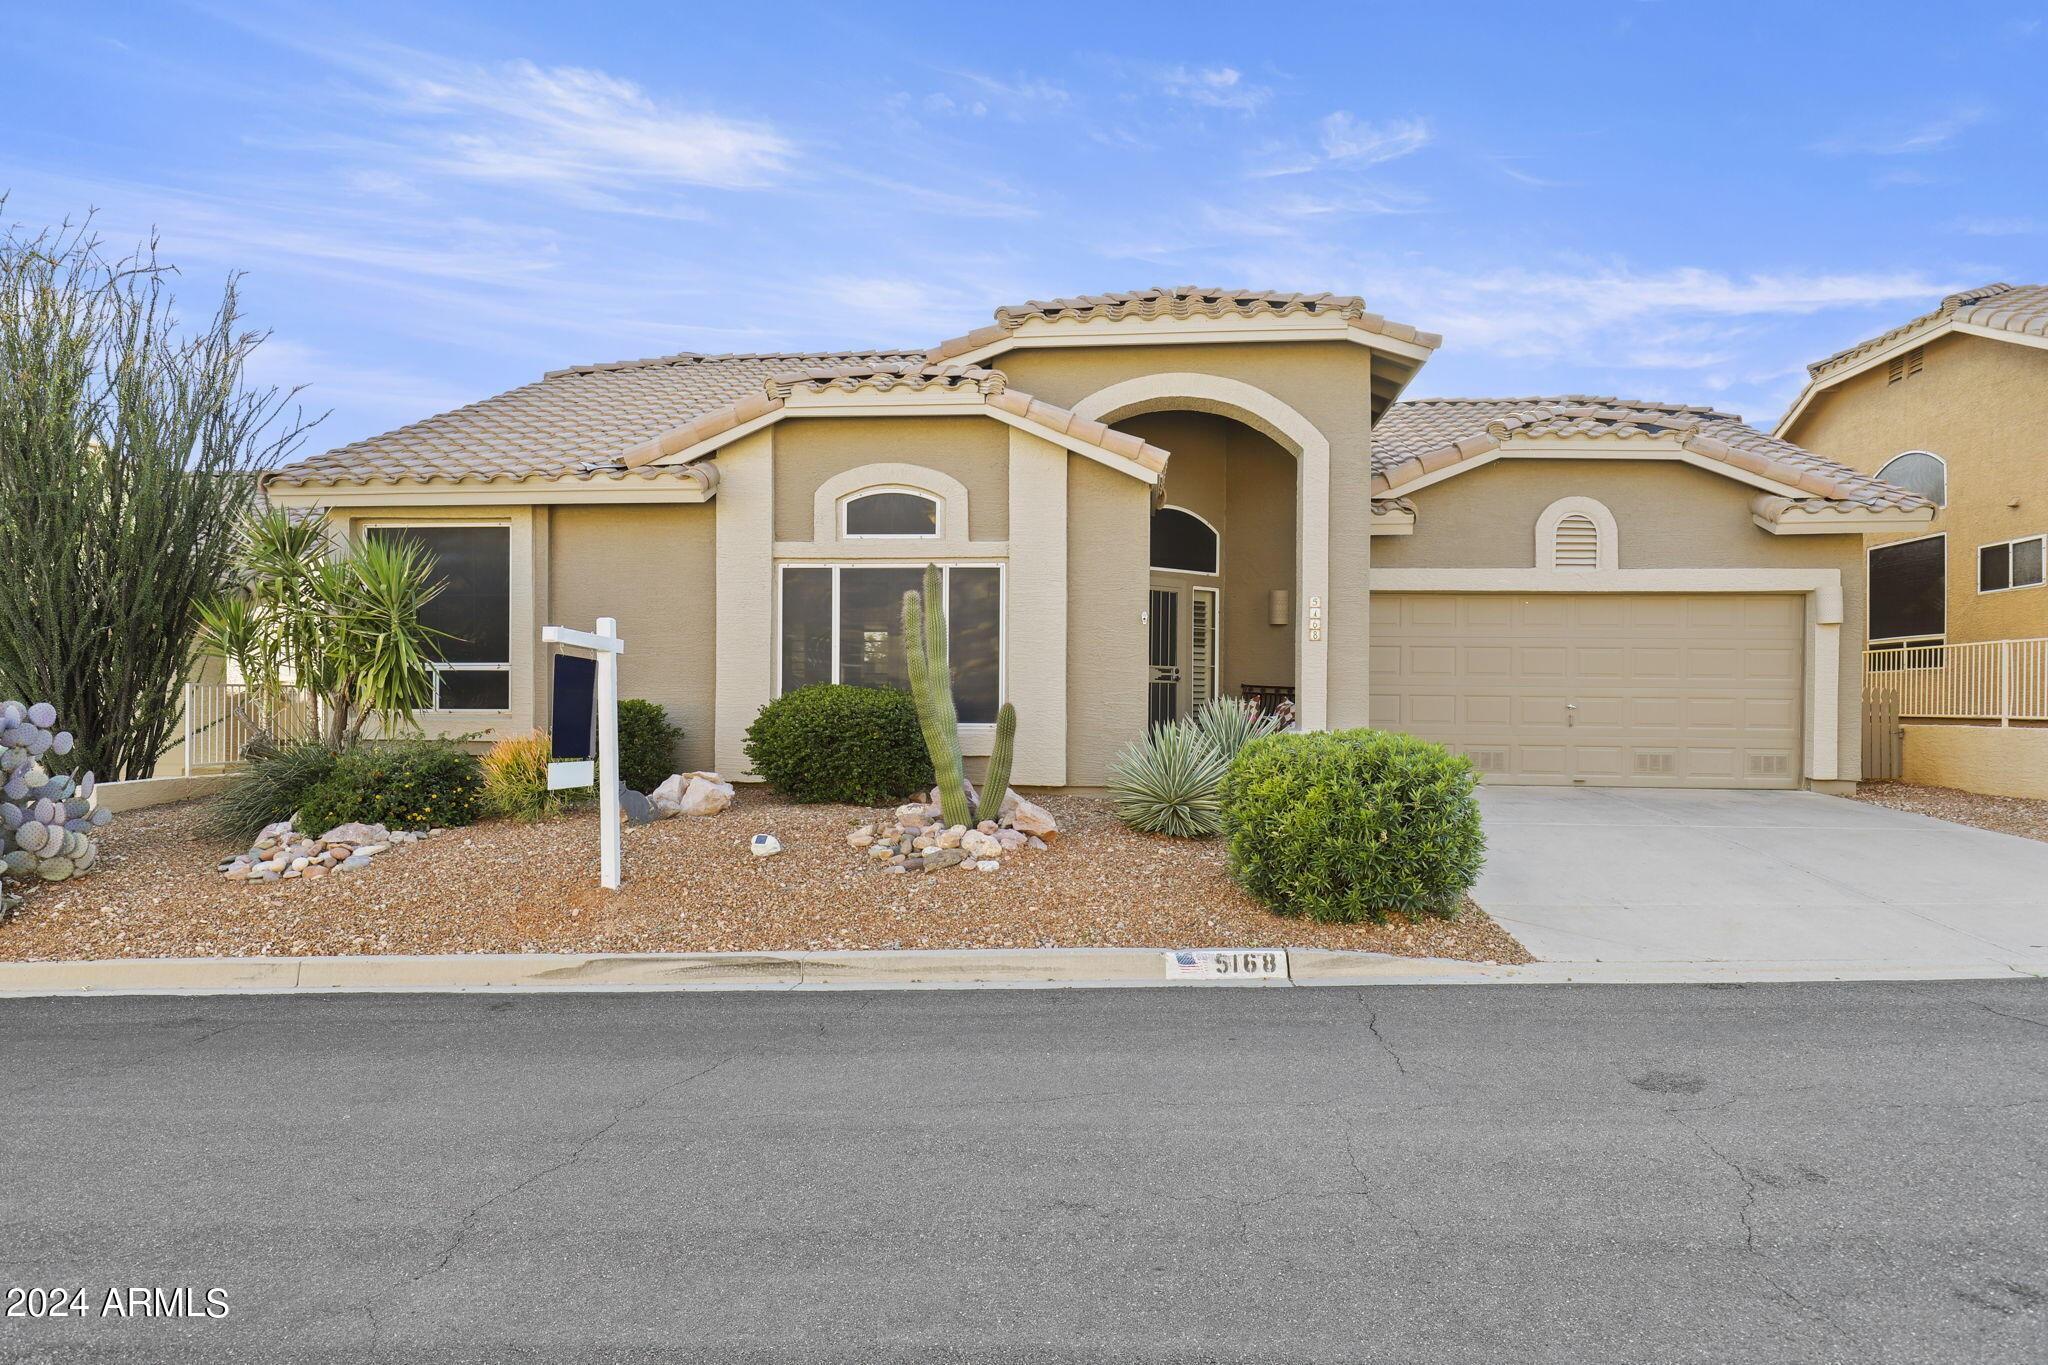 Property Image for 5168 S DESERT WILLOW Drive N